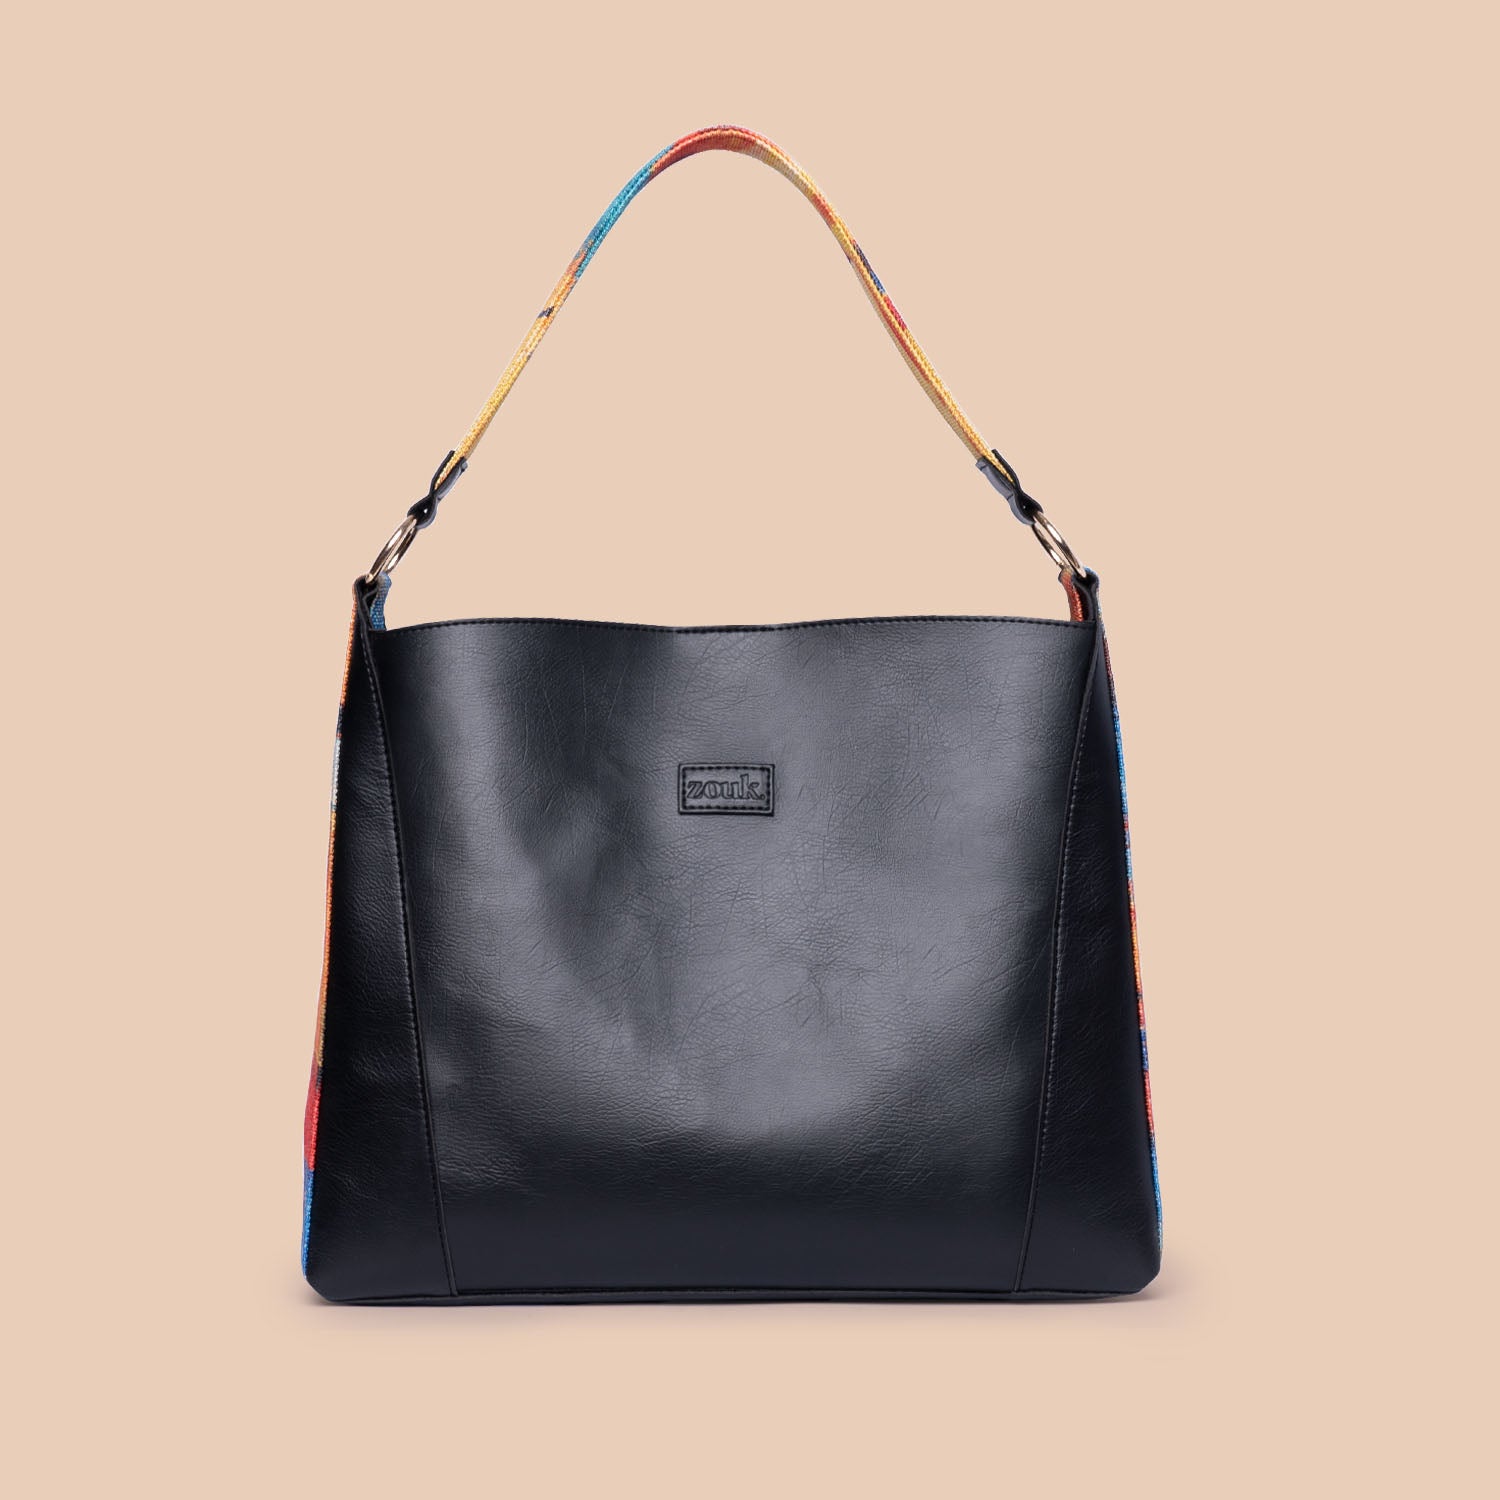 Abstract Amaze Classic Open Tote